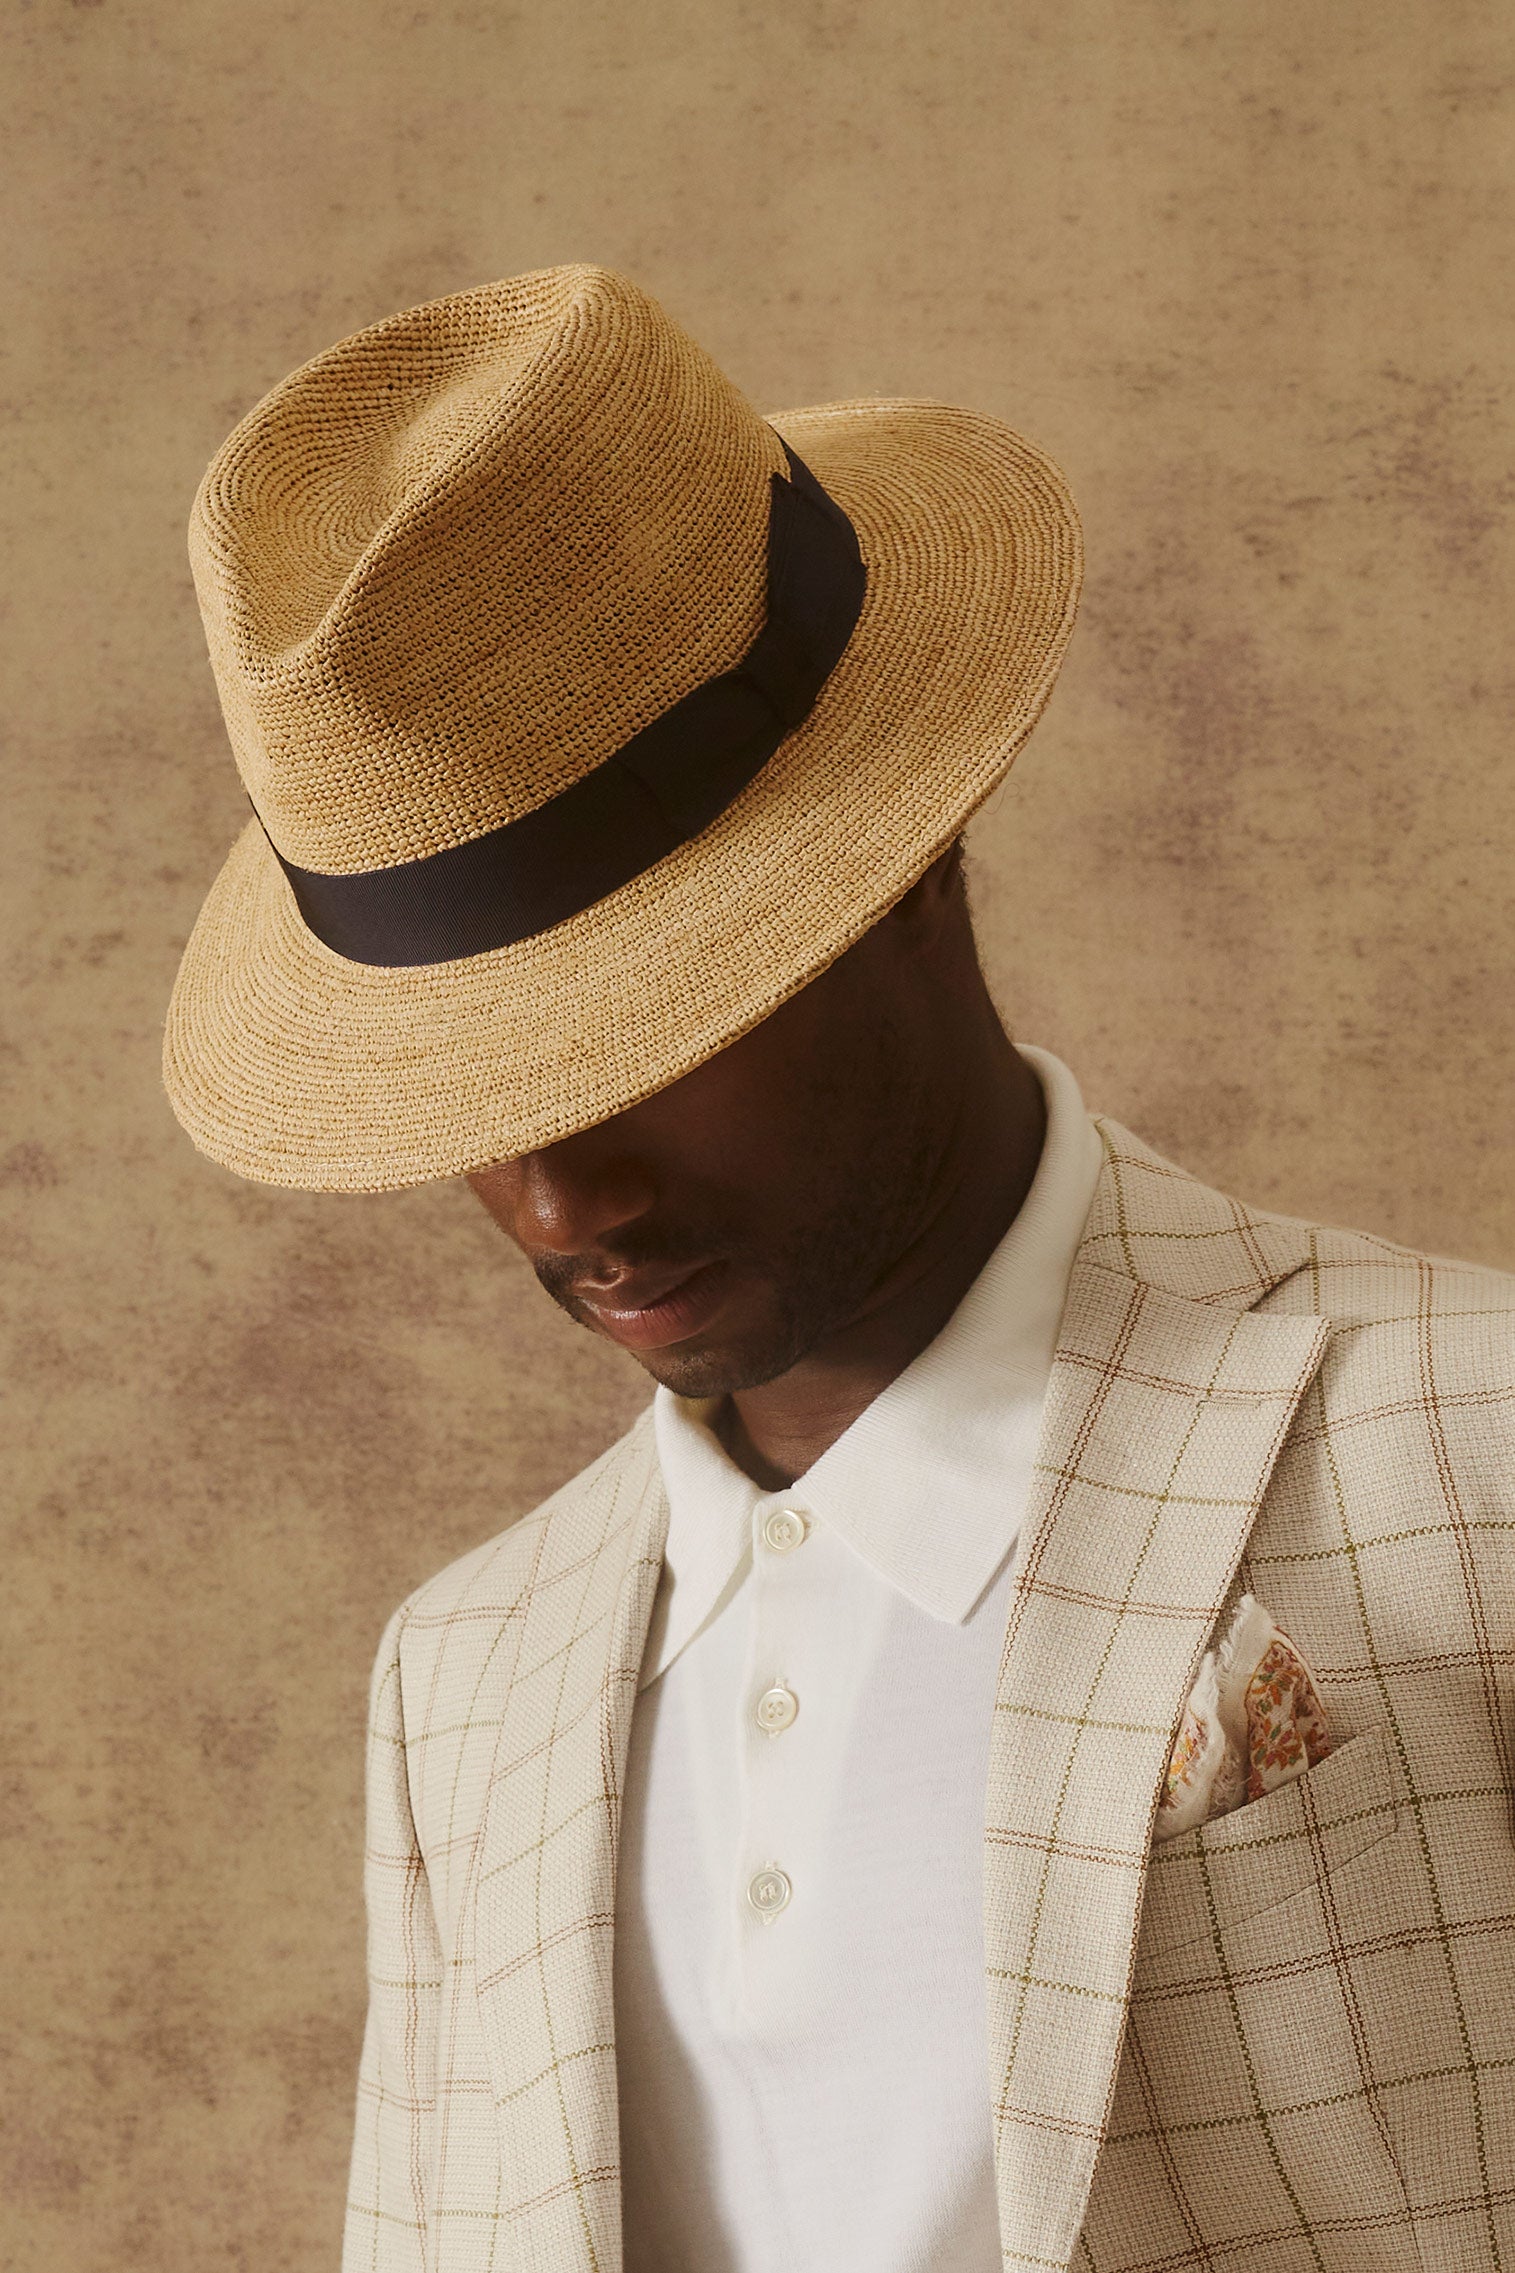 St Louis Trilby - Mens Featured - Lock & Co. Hatters London UK